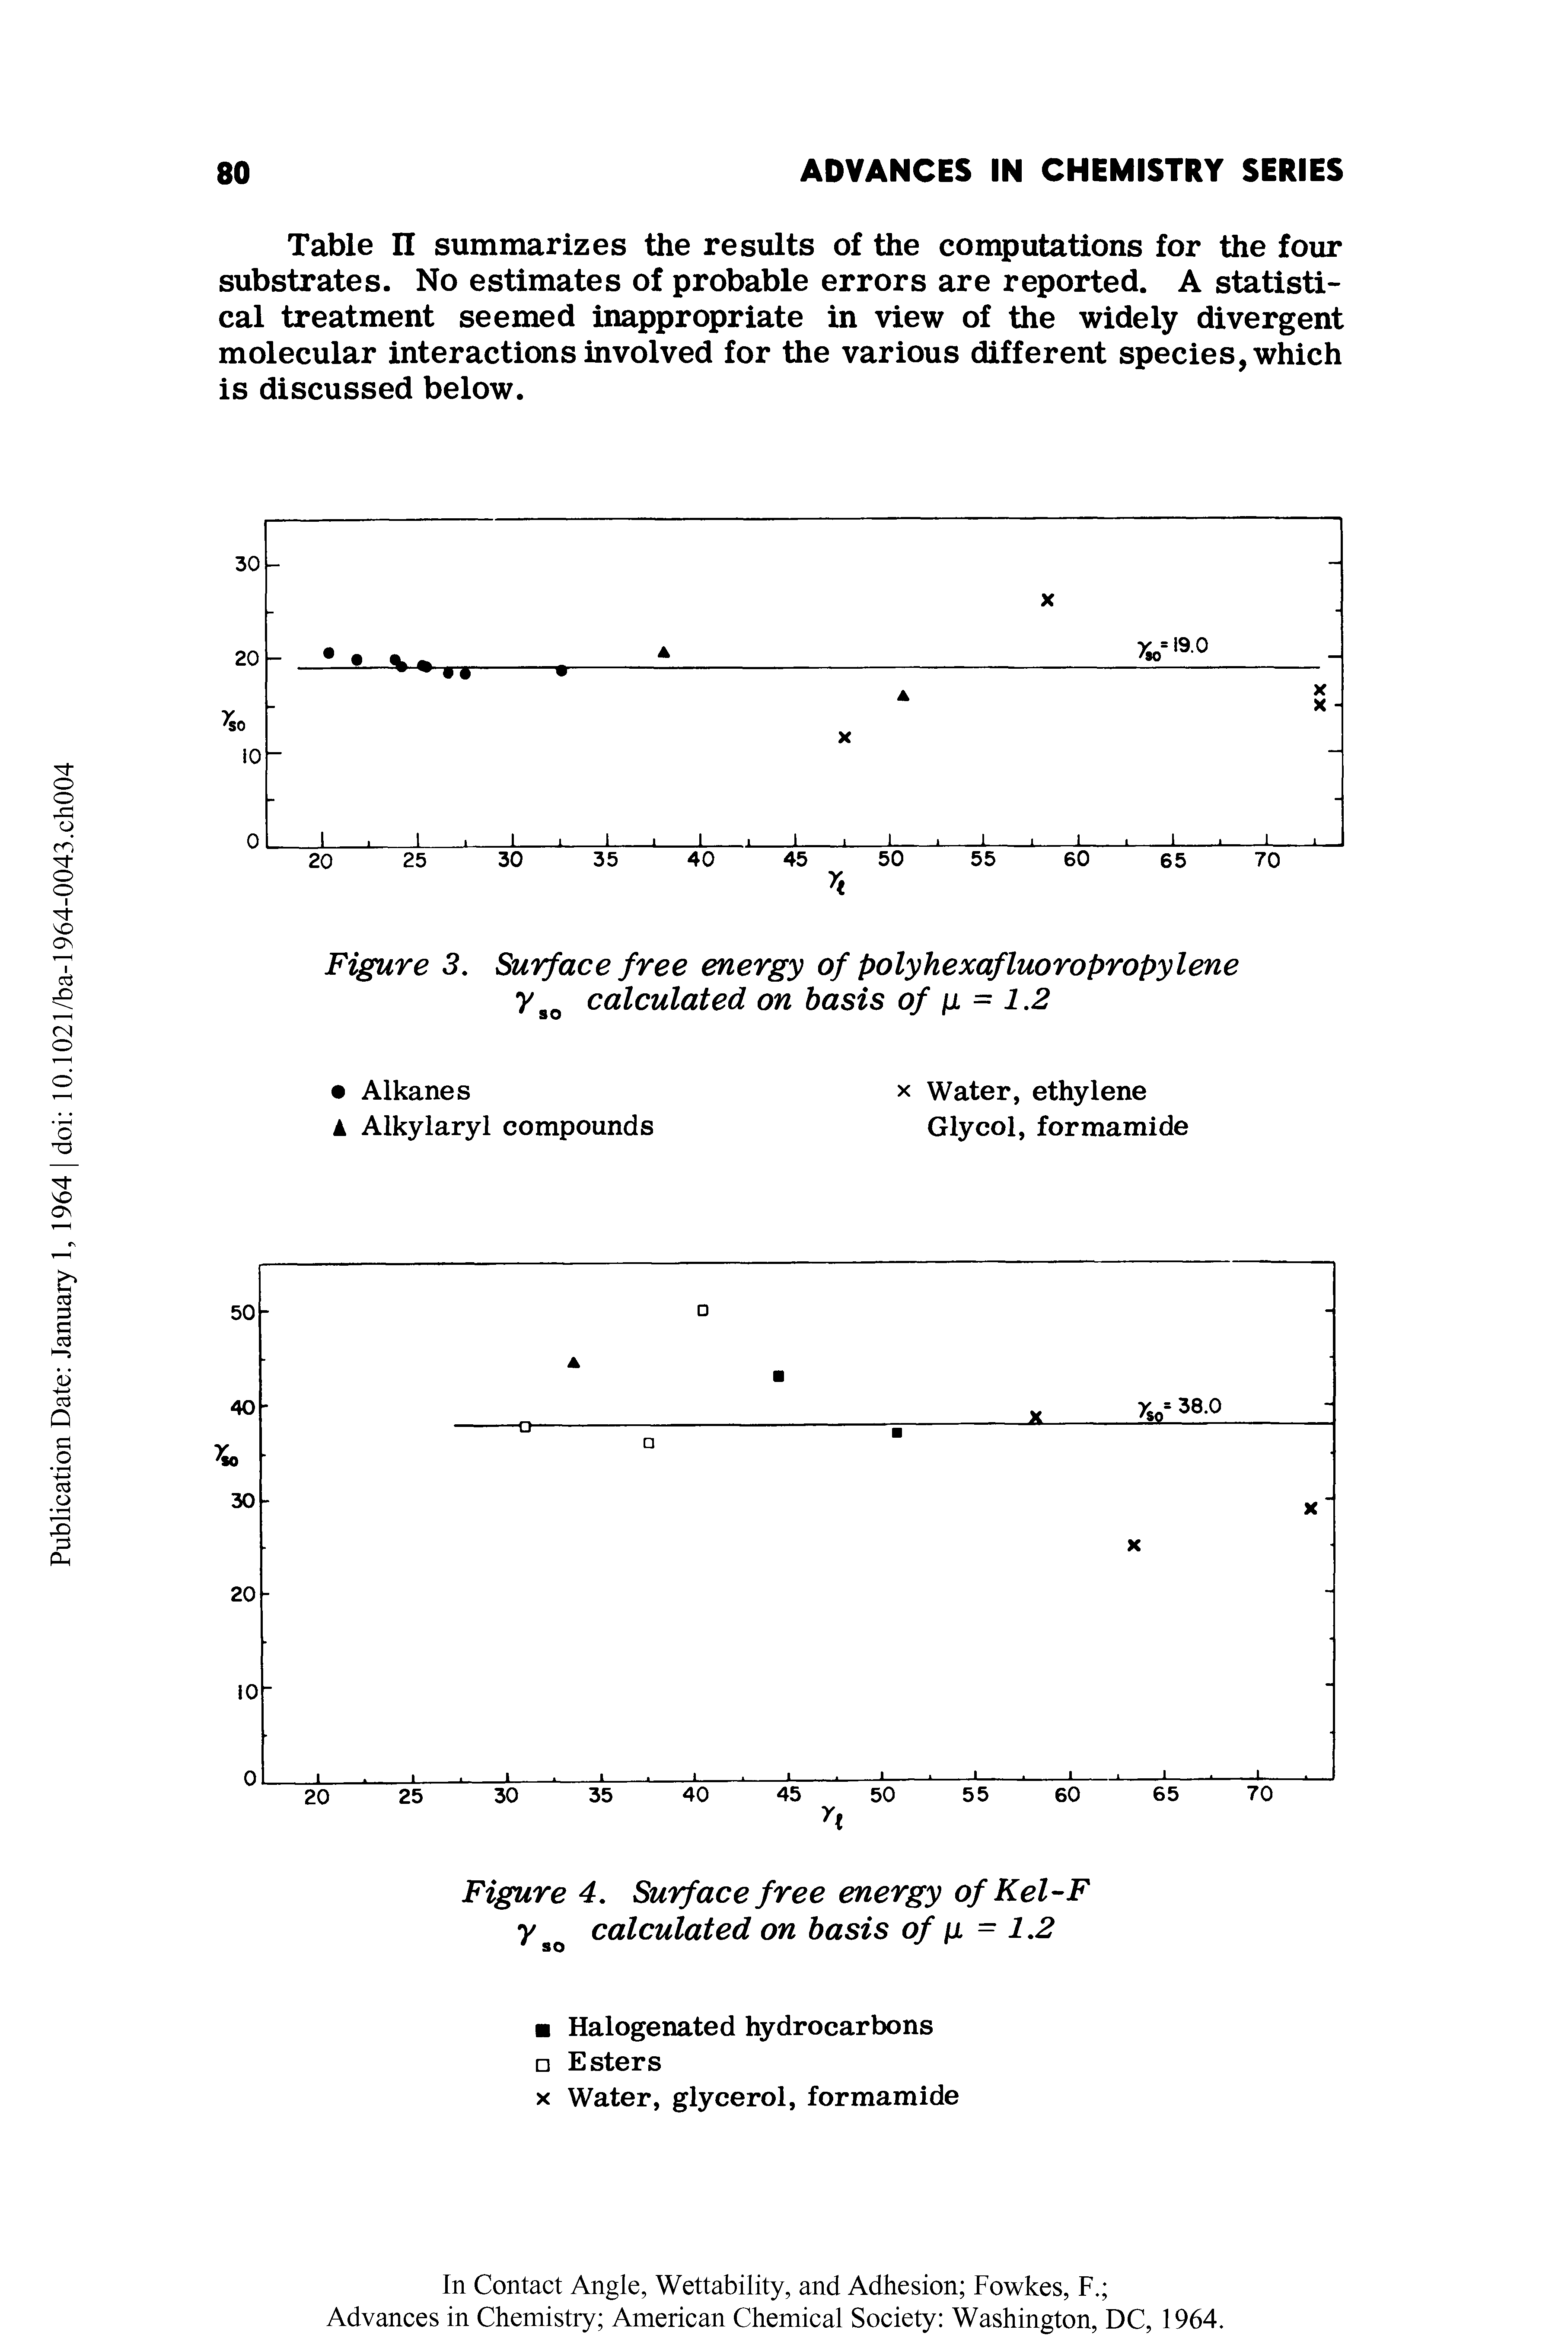 Table II summarizes the results of the computations for the four substrates. No estimates of probable errors are reported. A statistical treatment seemed inappropriate in view of the widely divergent molecular interactions involved for the various different species, which is discussed below.